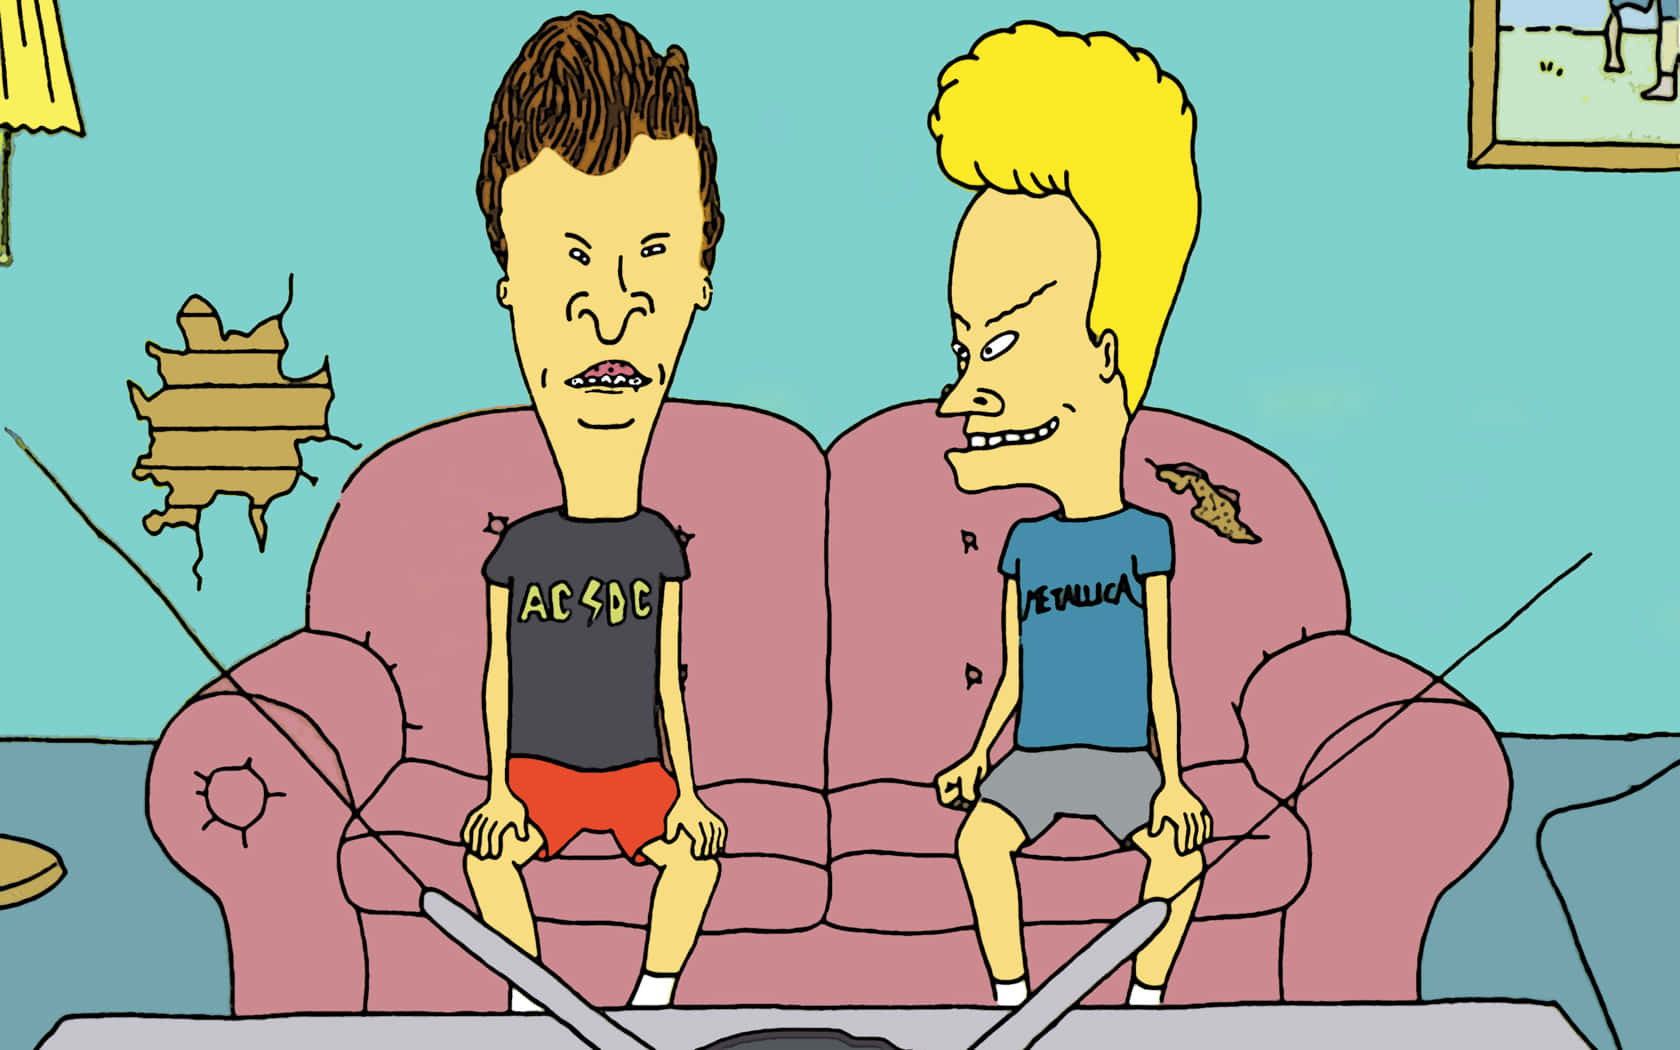 Beavis and Butthead contemplating life